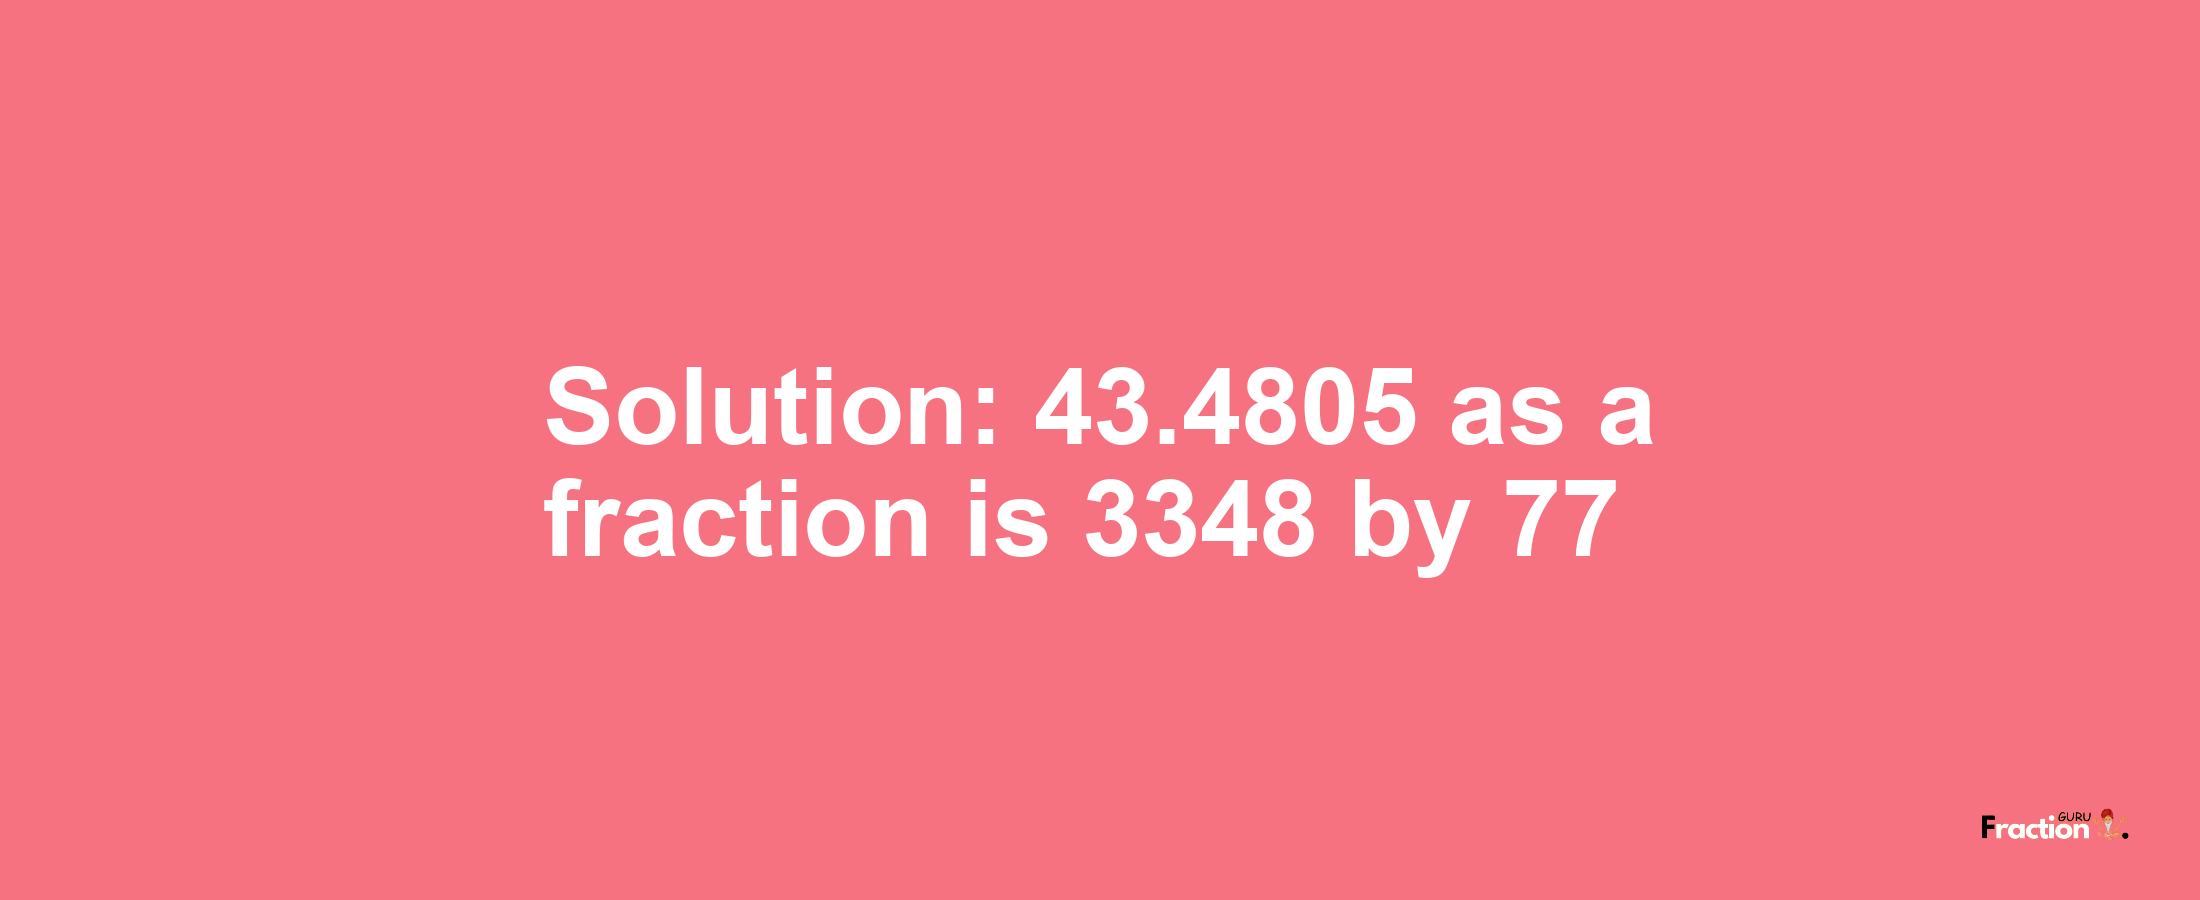 Solution:43.4805 as a fraction is 3348/77